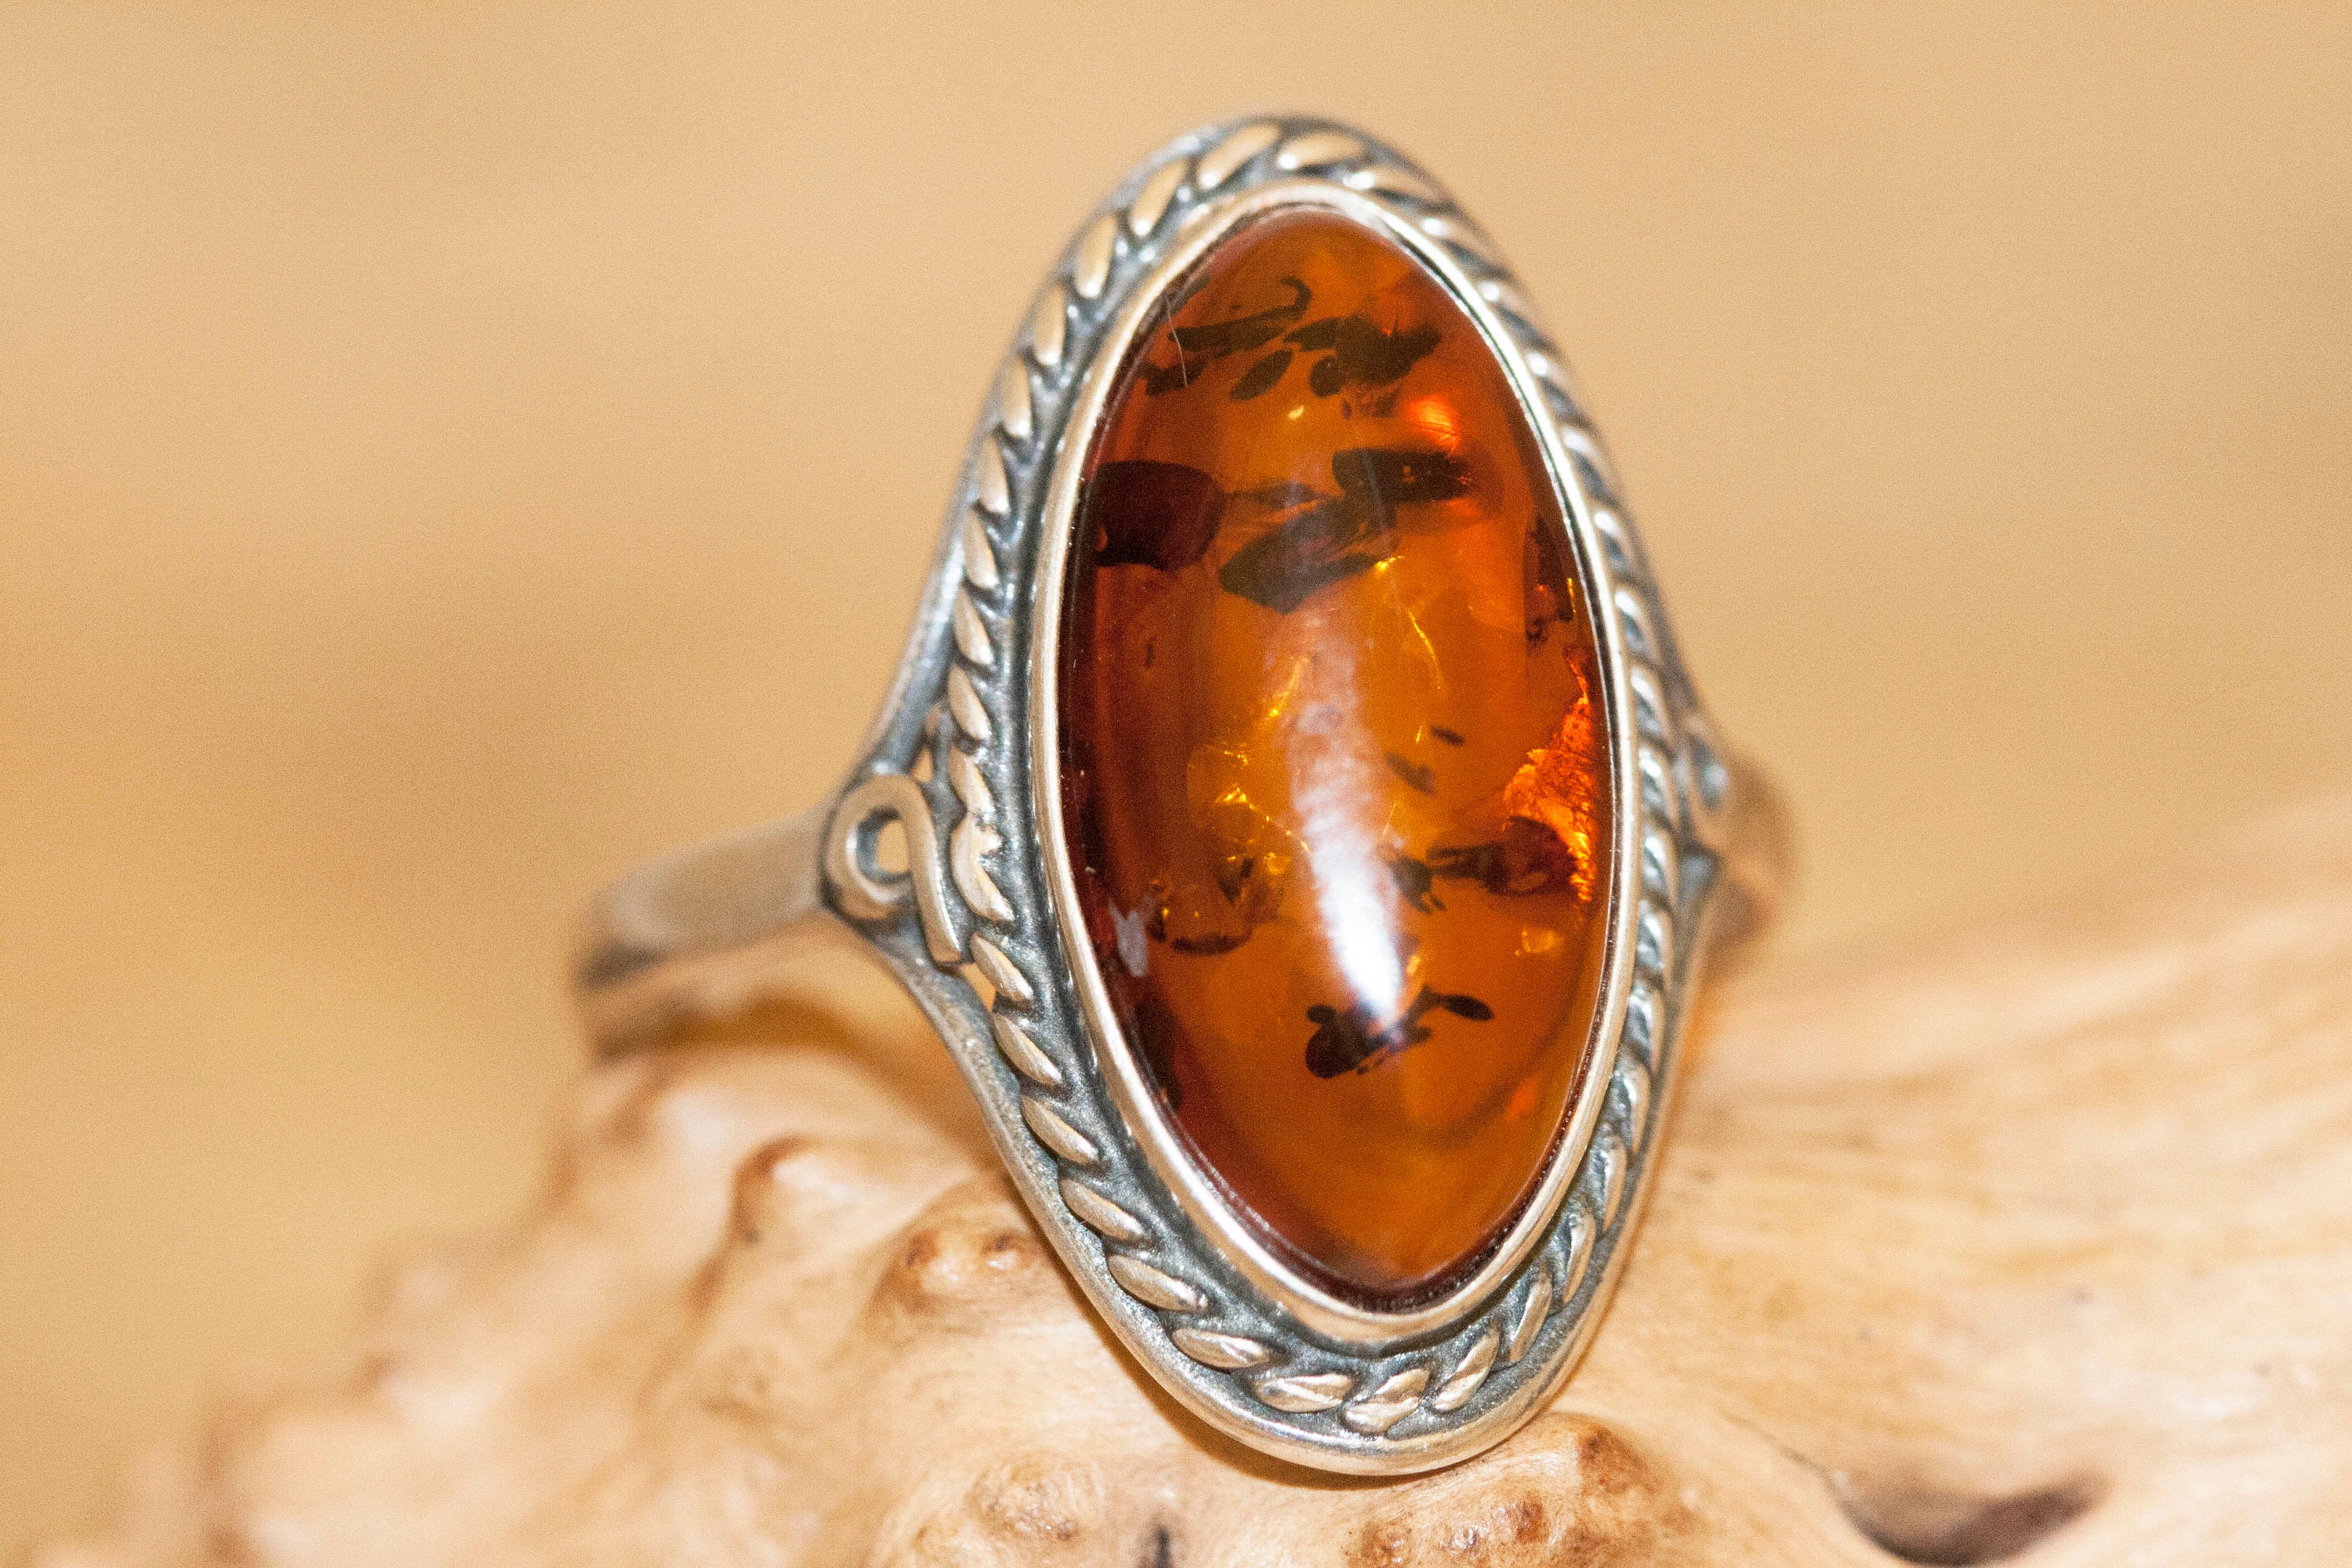 Baltic amber ring. Cognac piece of Baltic amber fitted in | Etsy